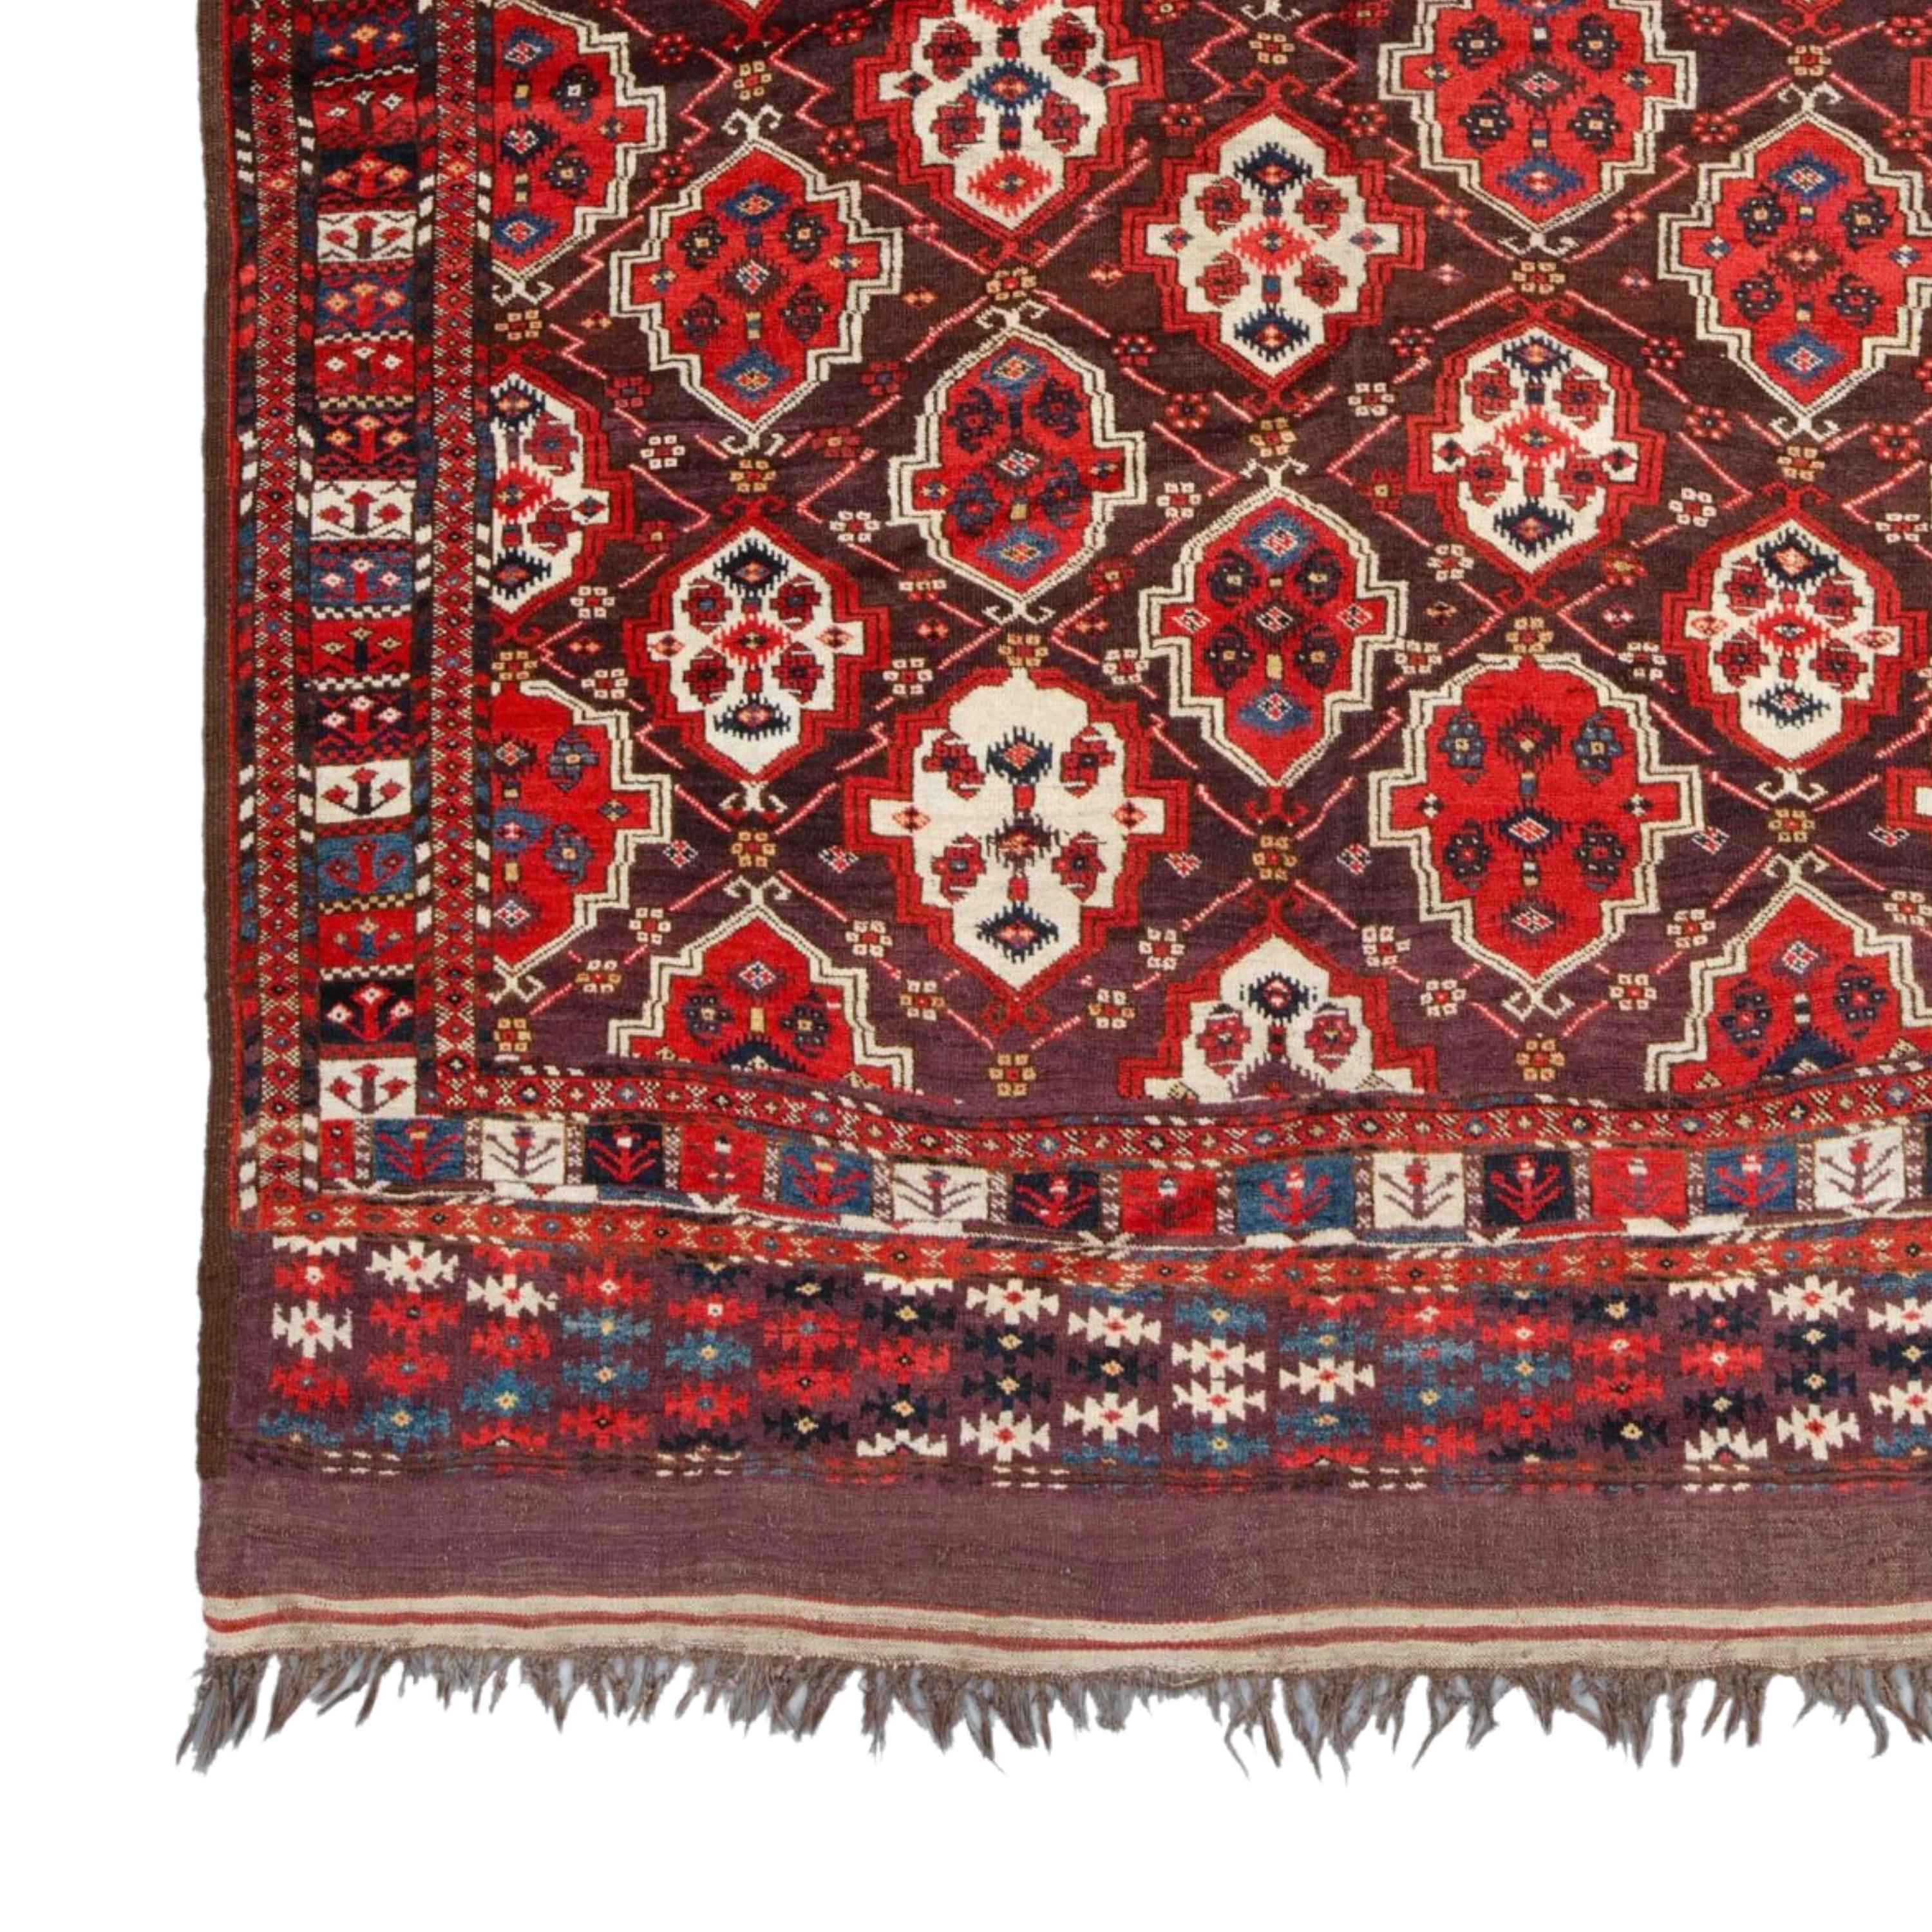 Middle of 19th Century Central Asia Turkmen Chodor Main Rug
Size 190 x 310 cm (74,8 x 122 In)

This elegant Turkmen Chodur Main carpet is a work of art from the mid-19th century. This rug in rich shades of red and burgundy is known for its carefully